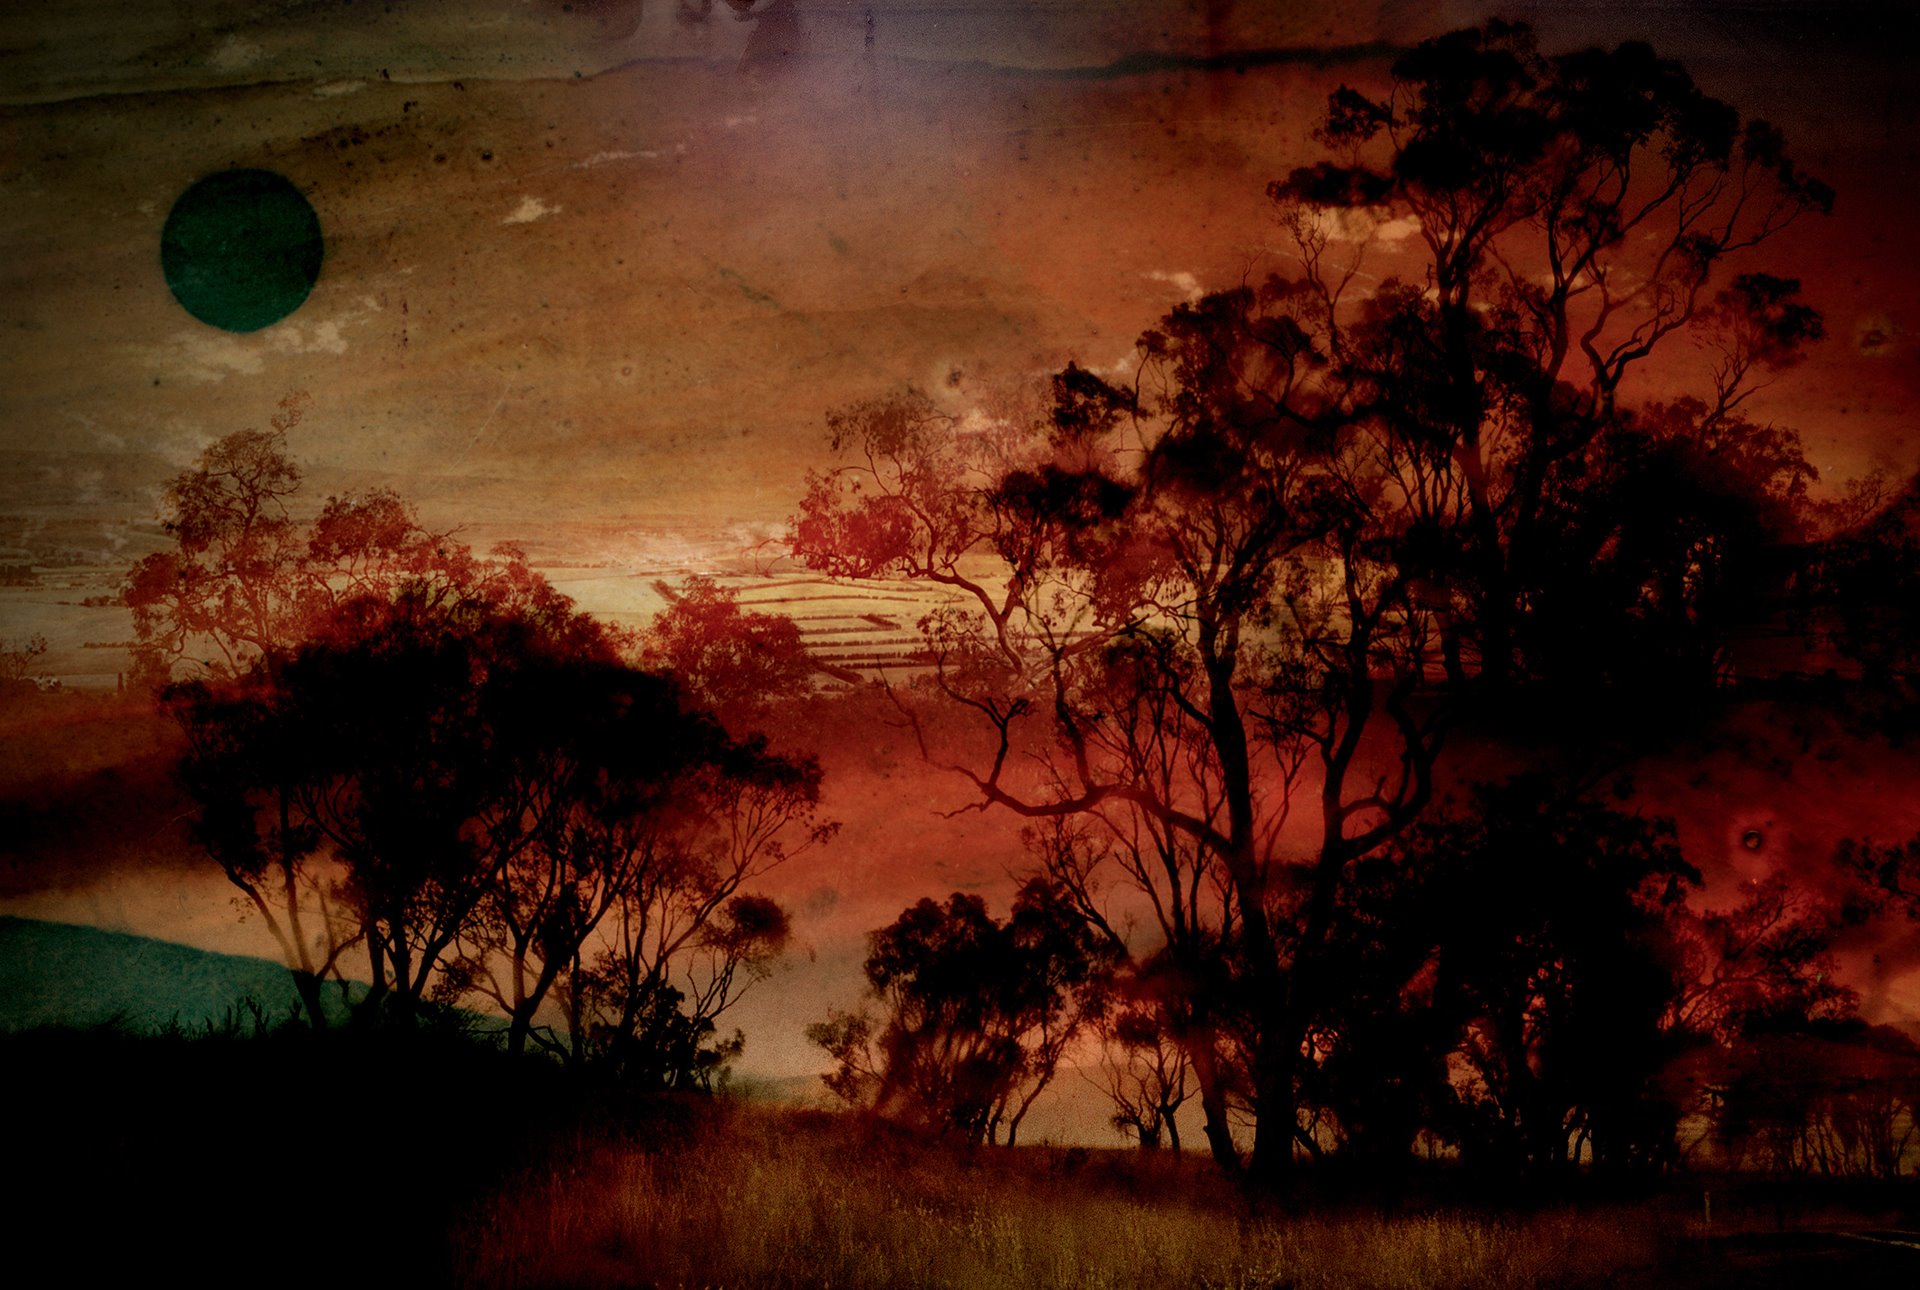 Landscape photograph taken in New South Wales and painted with coloured inks and paints by the photographer. Outskirts of Bathurst (Wiradjuri Country), Australia.